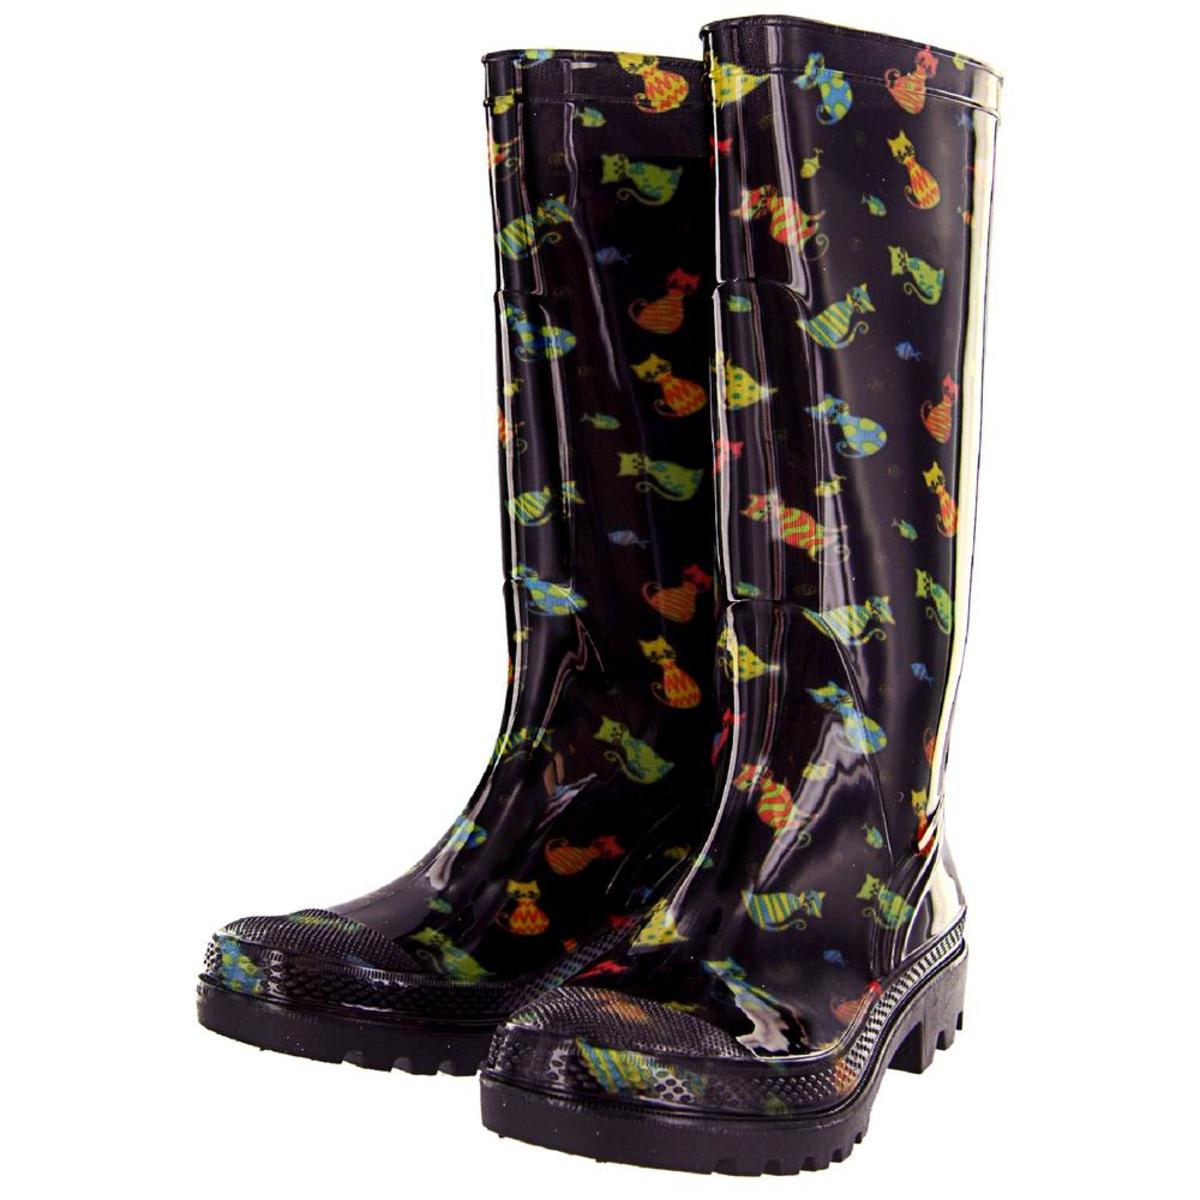 These boots are truly amazing for anyone who works outdoors or who lives in a rainy area.  